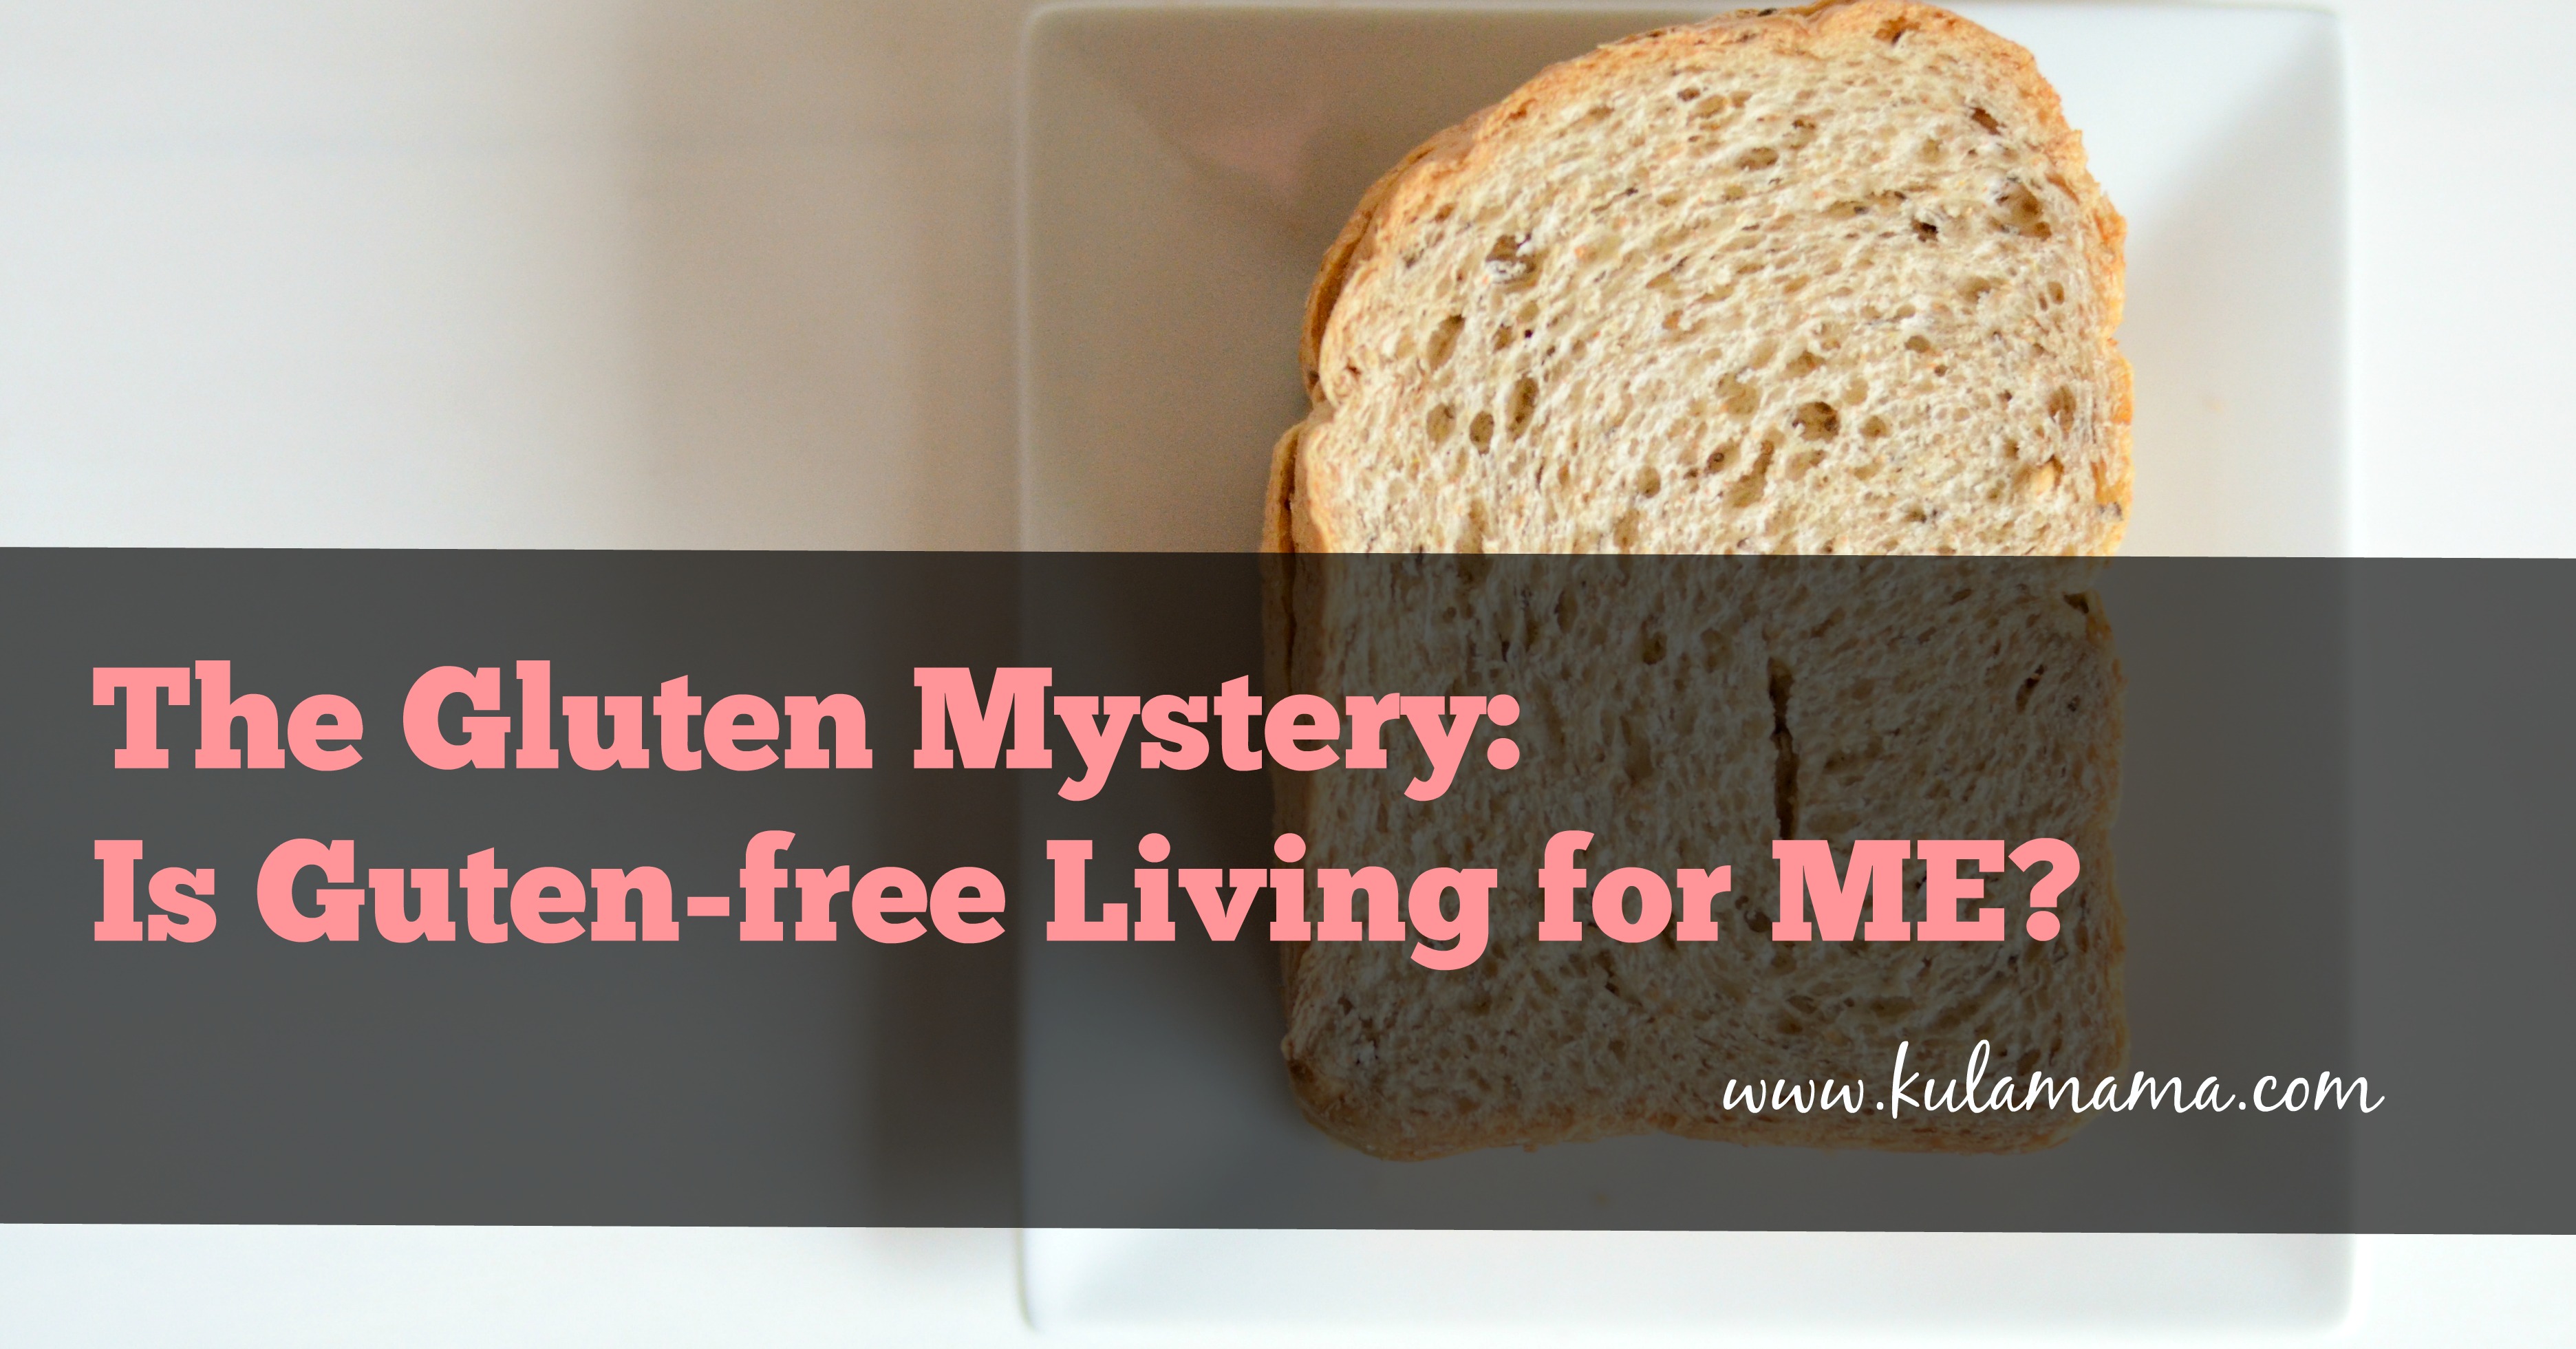 The Gluten Mystery: Is Gluten-Free Living for ME?